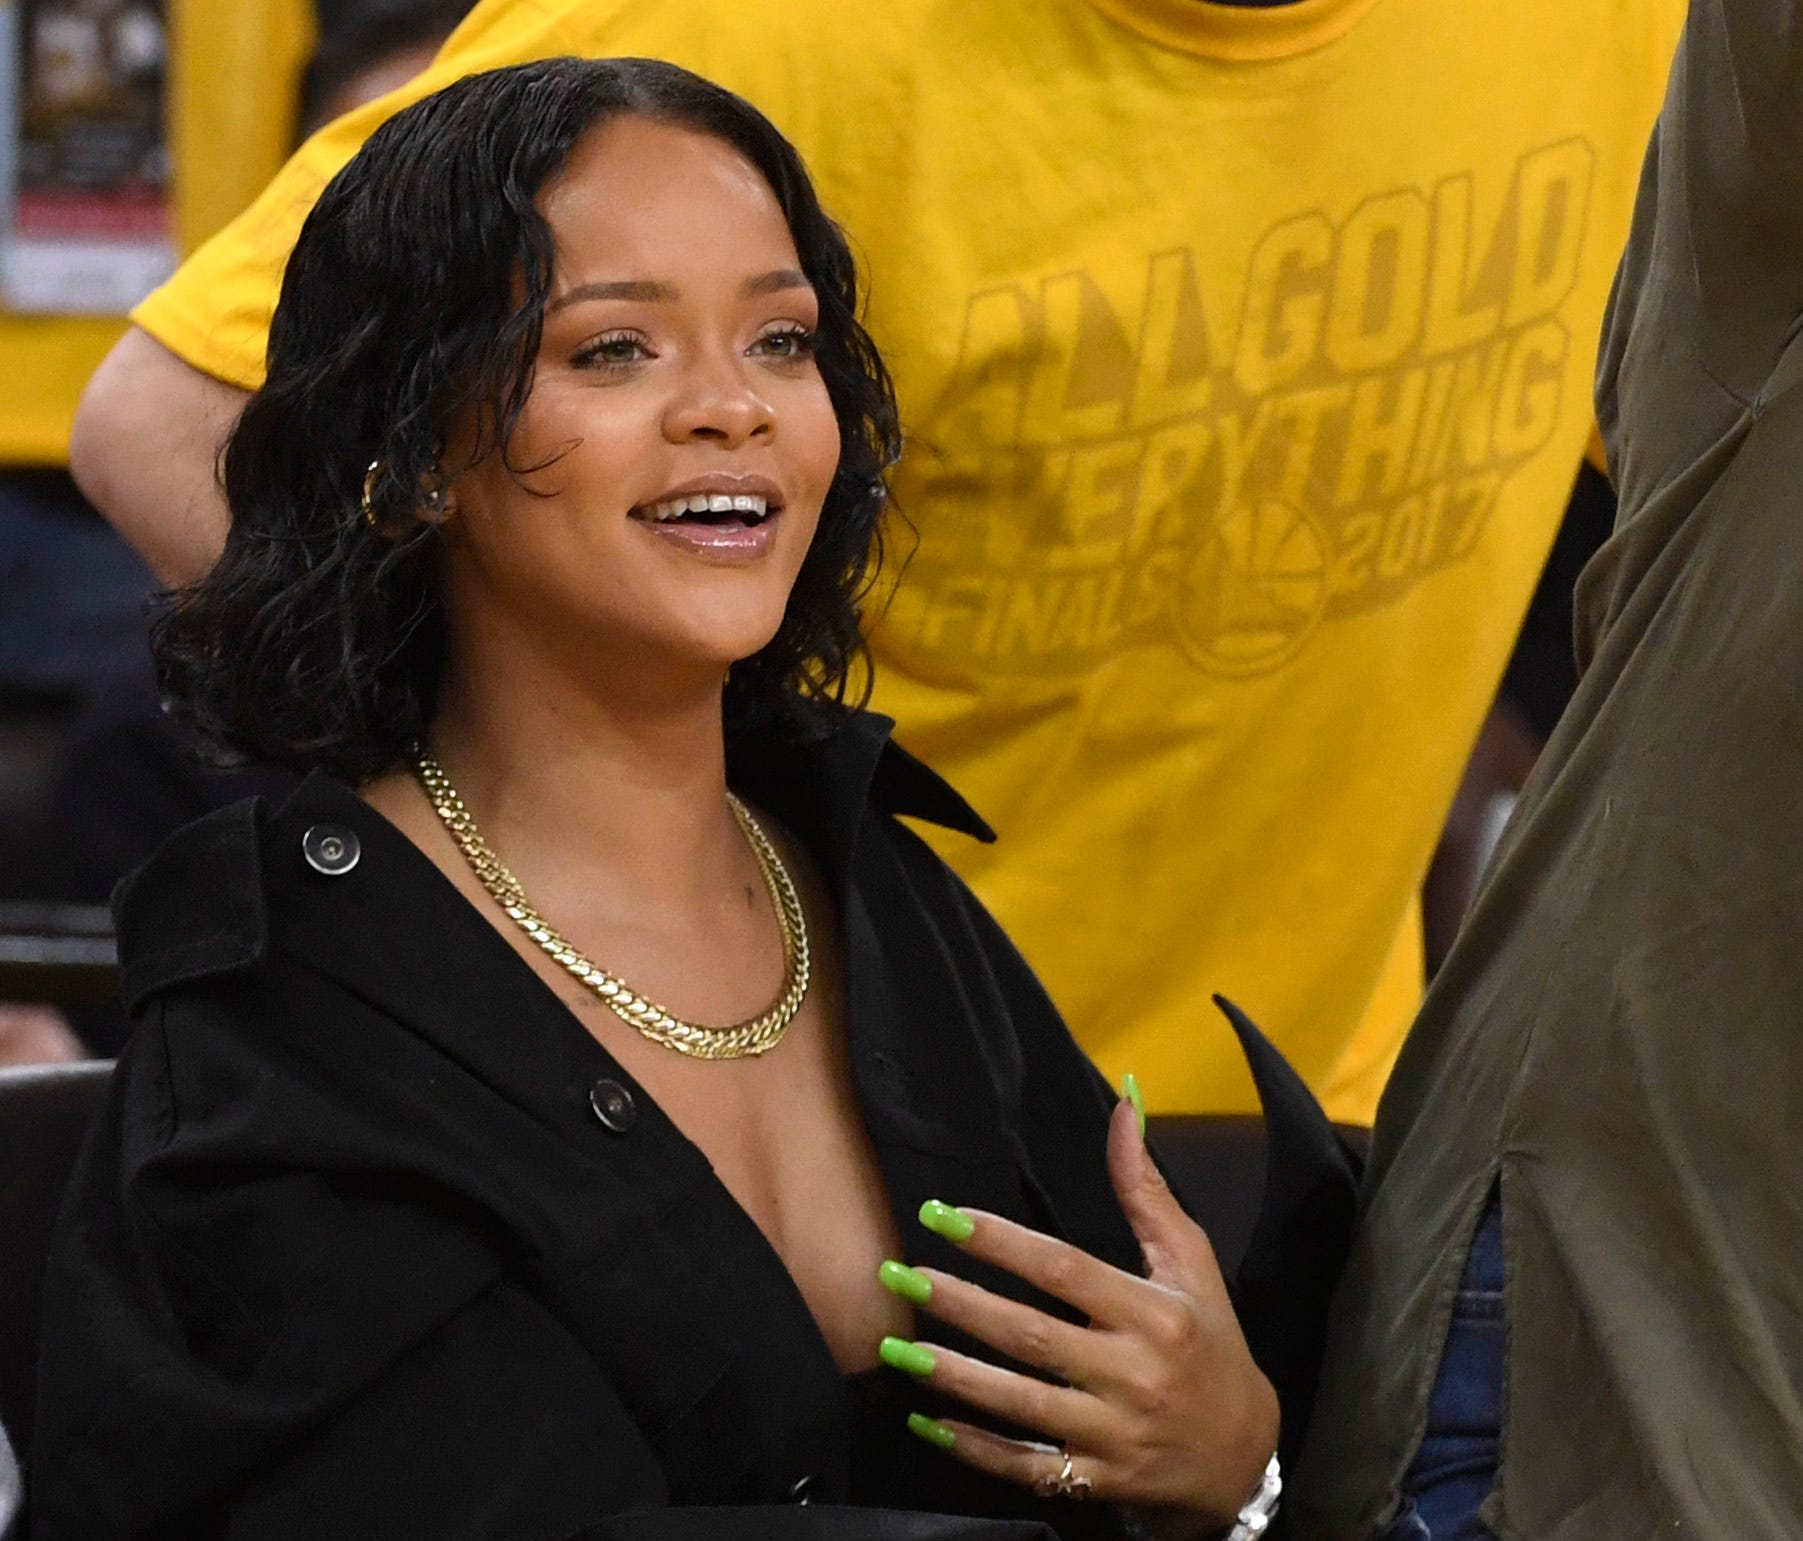 Recording artist Rihanna in attendance for Game 1 of the 2017 NBA Finals.